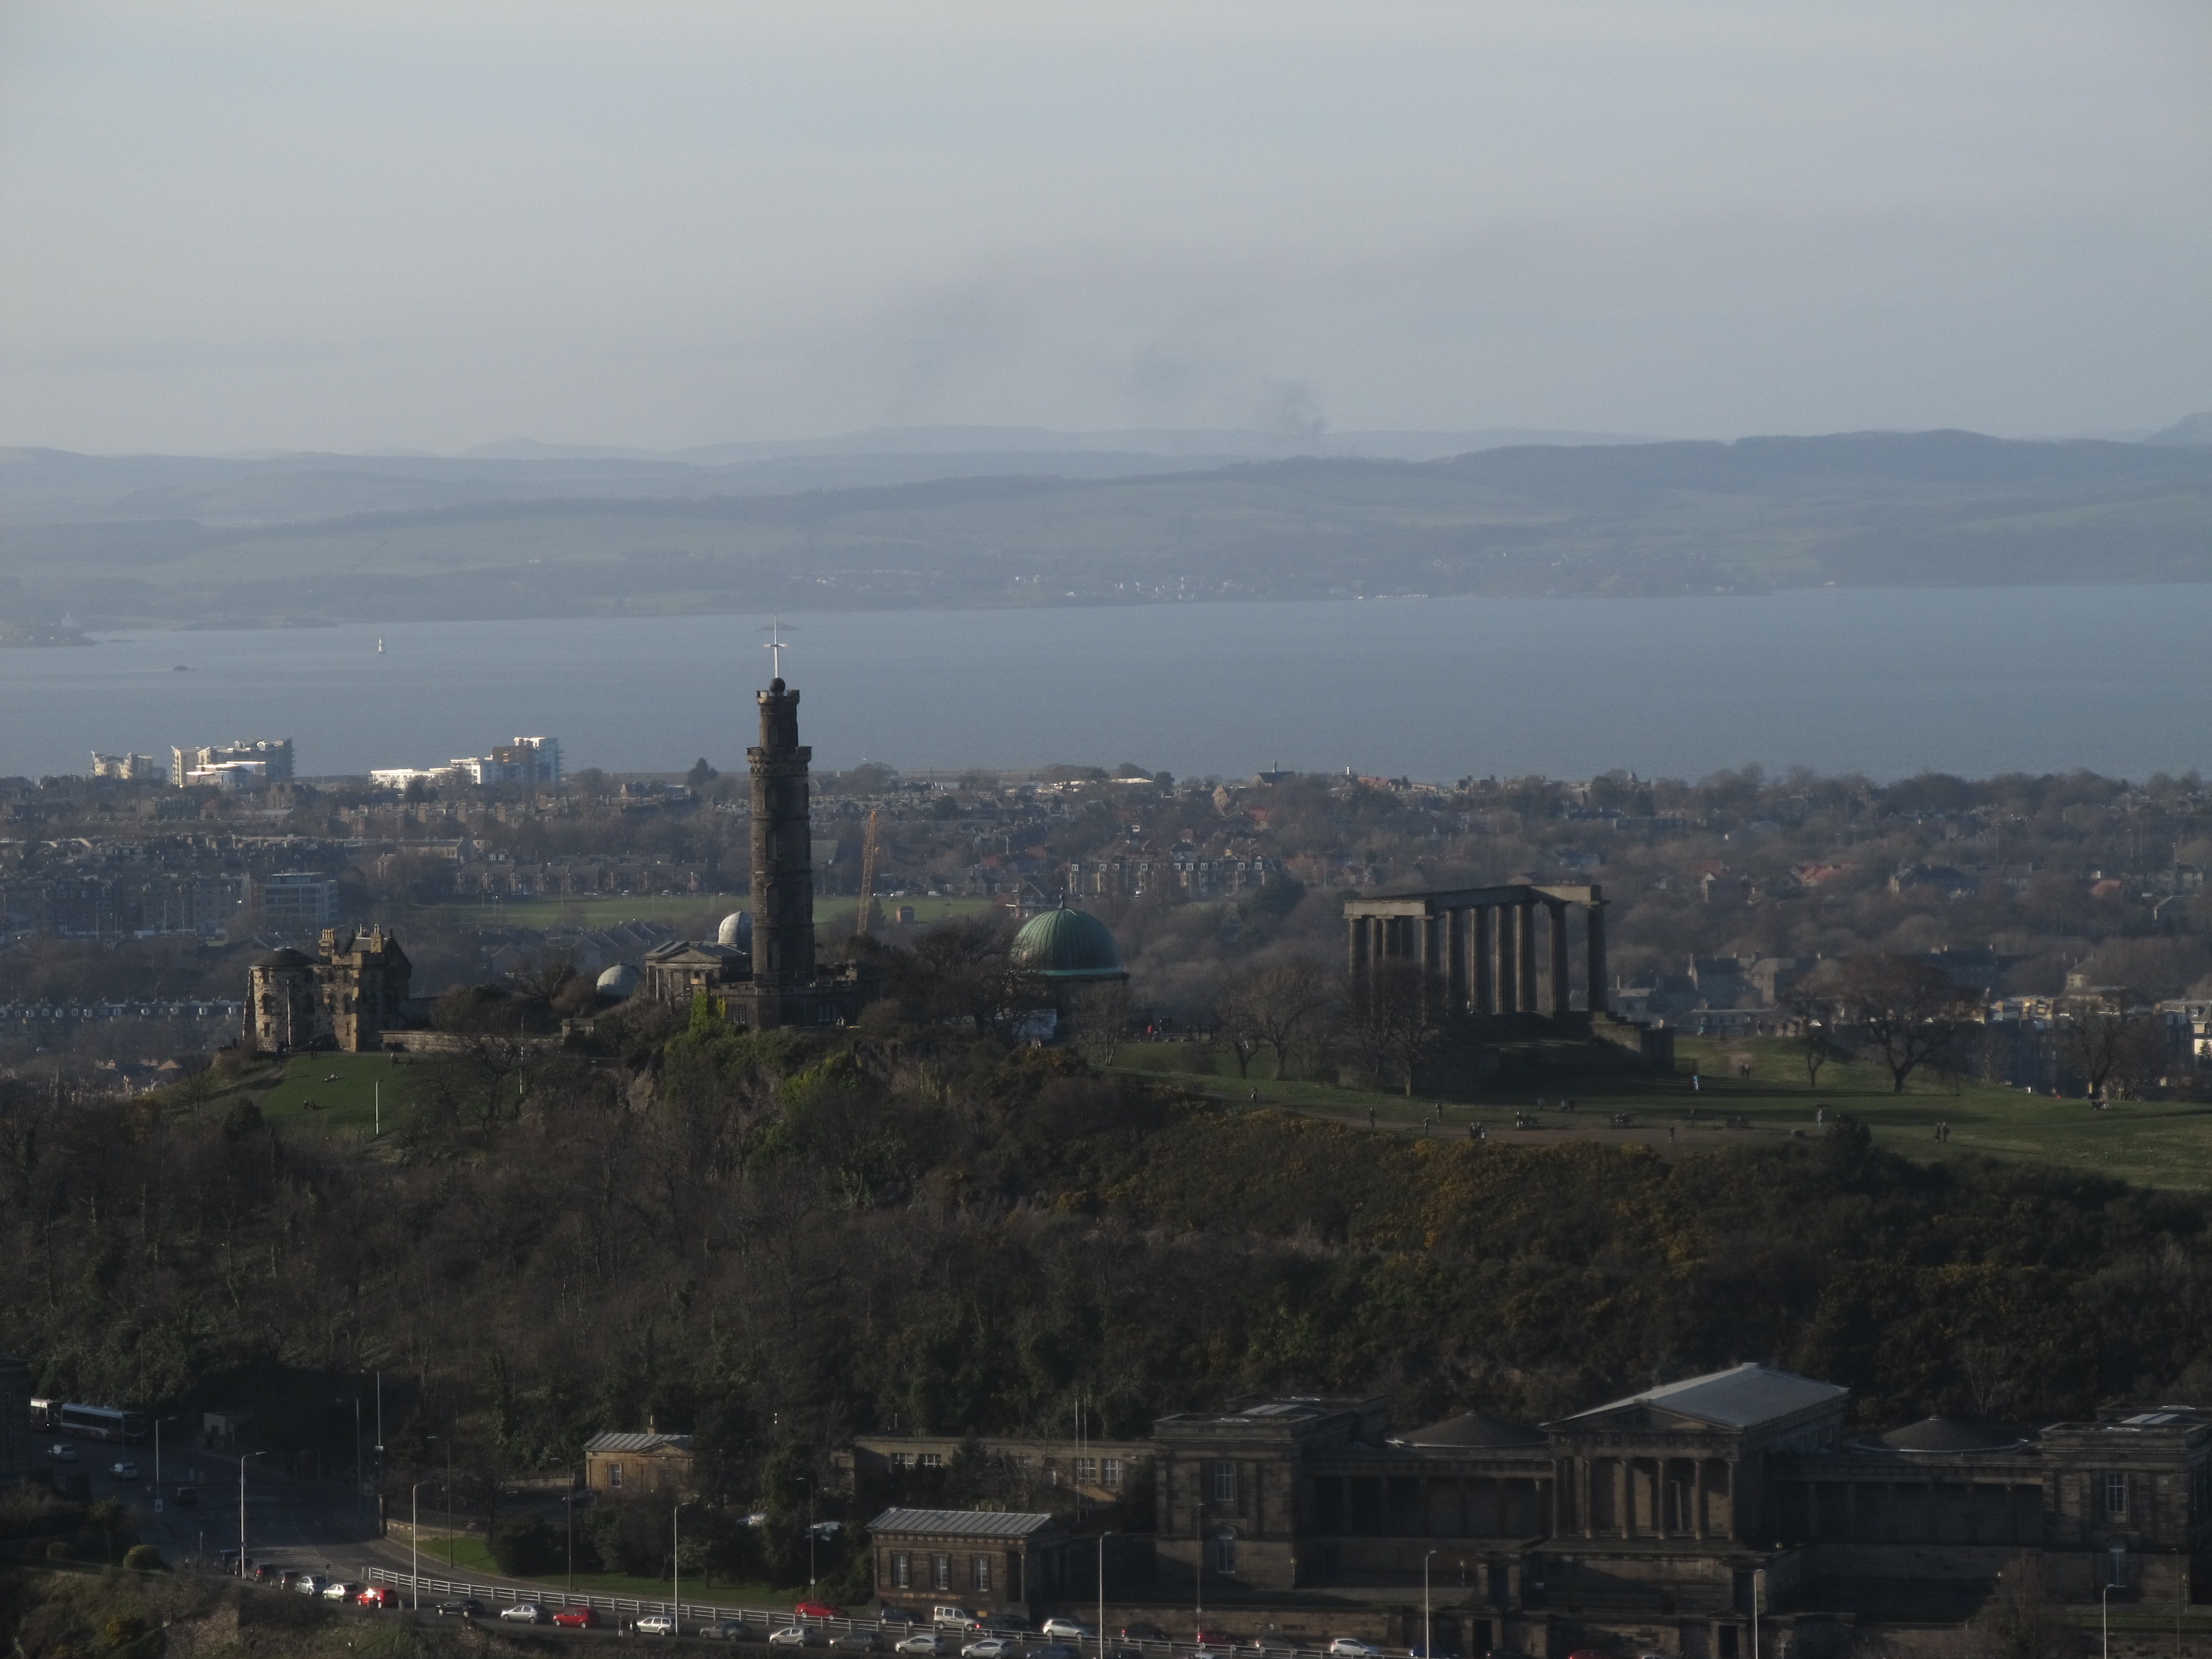 The Calton Hill and Firth of Forth seen from the Arthur's Seat